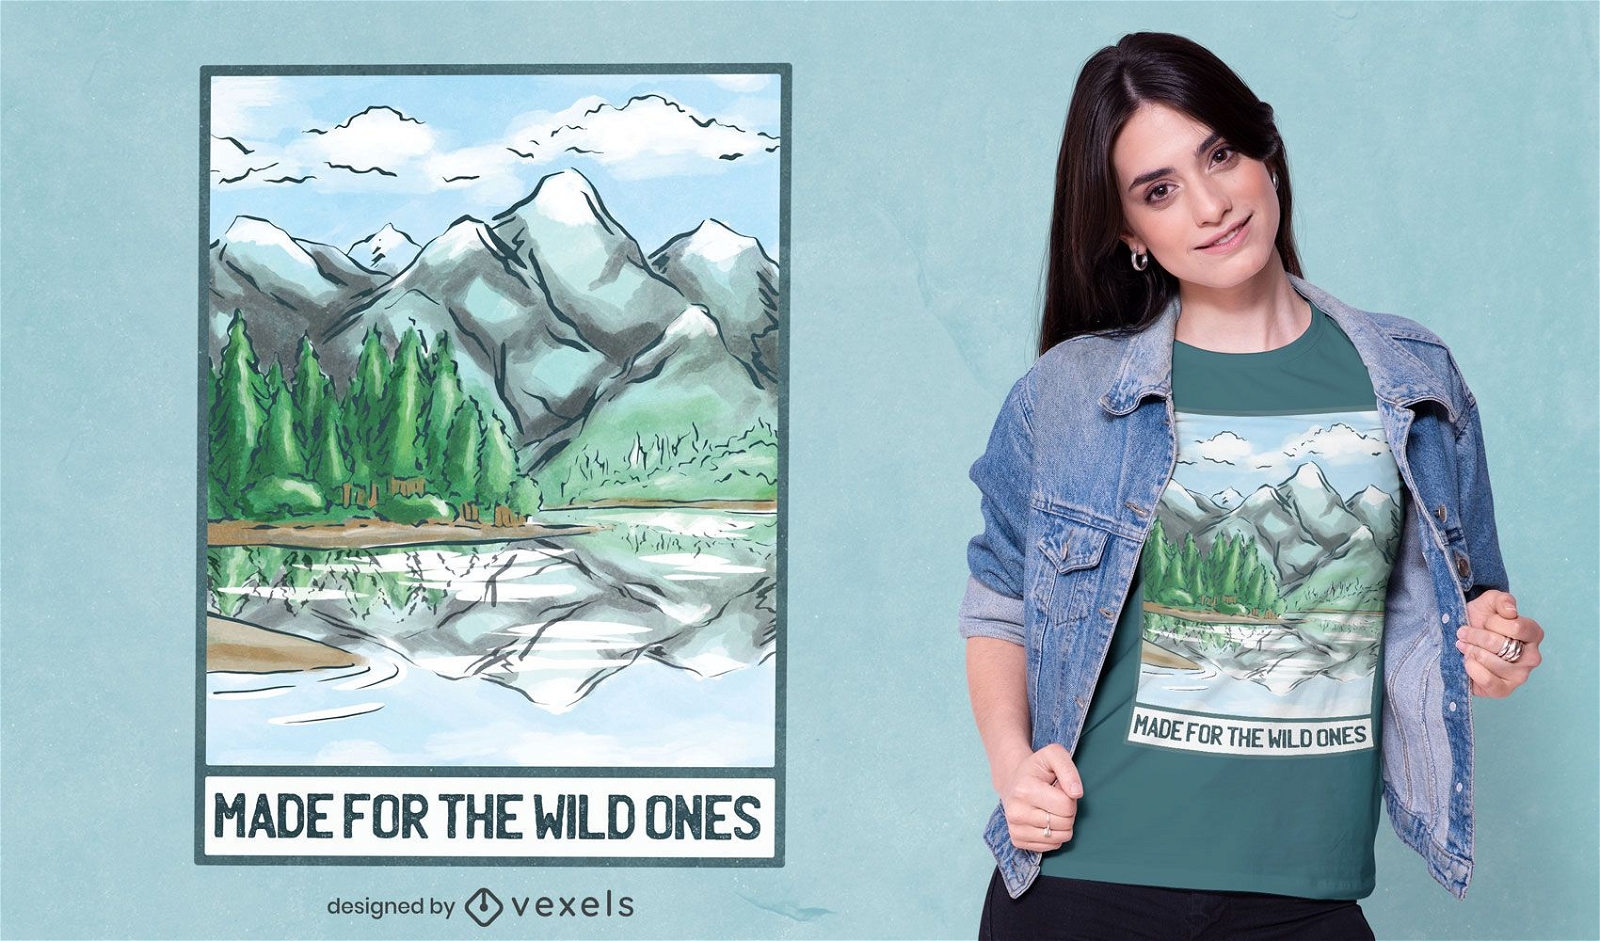 For the wild ones t-shirt design